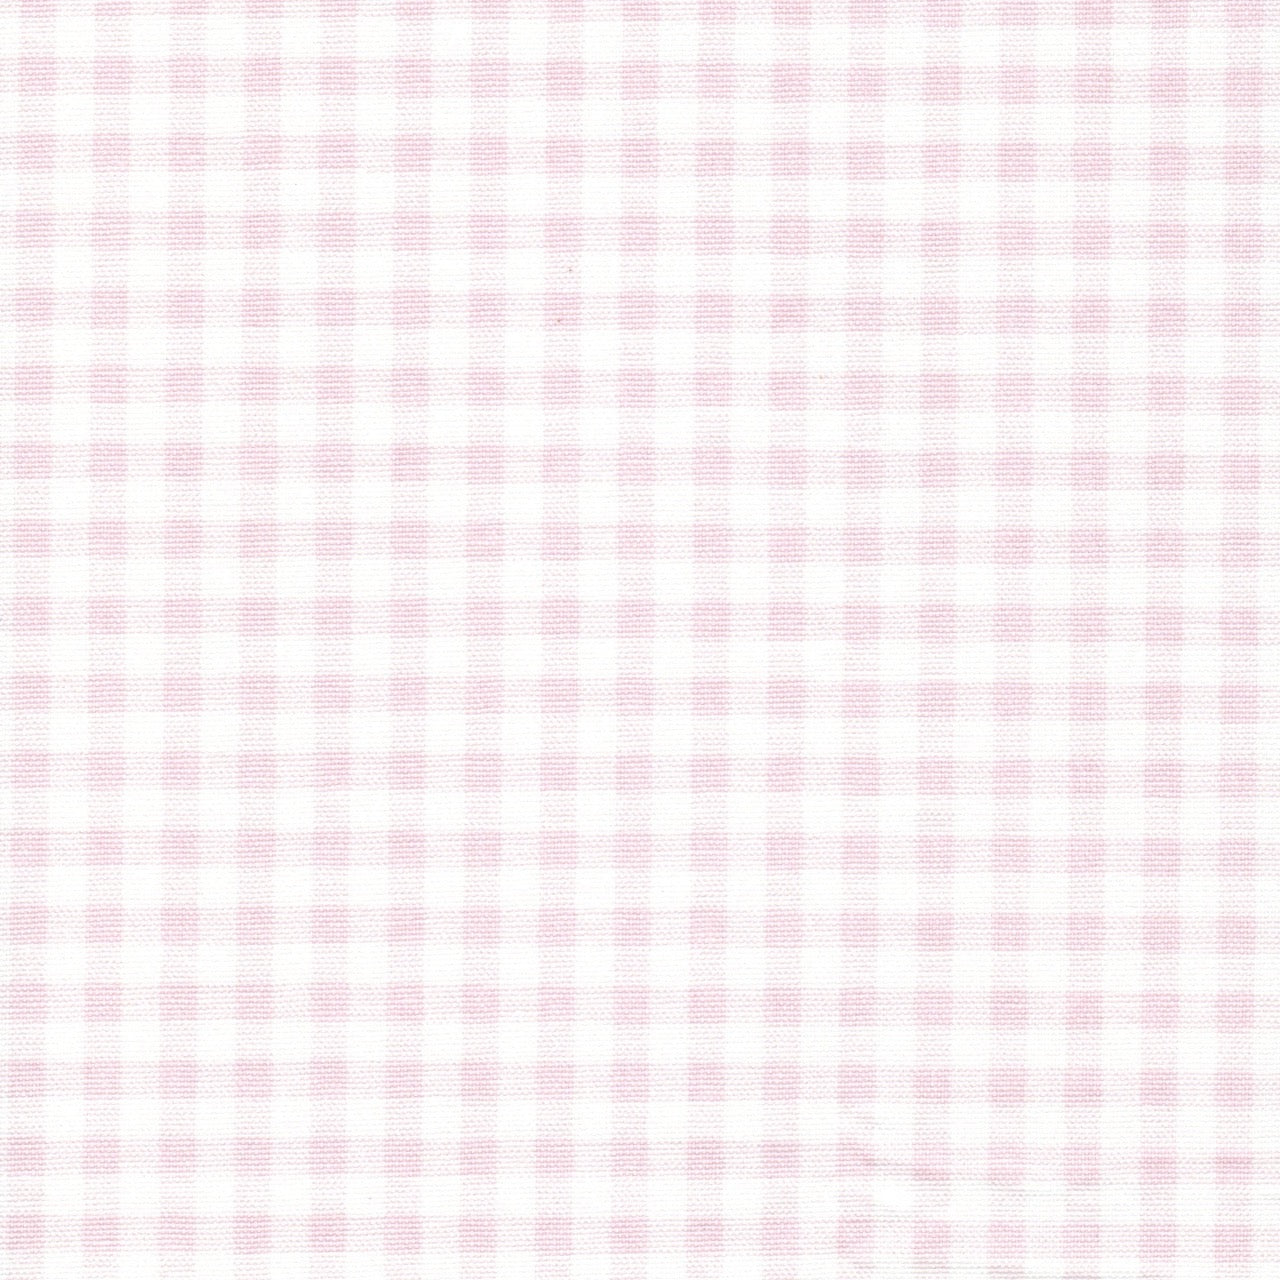 Large Gingham Fabric Samples